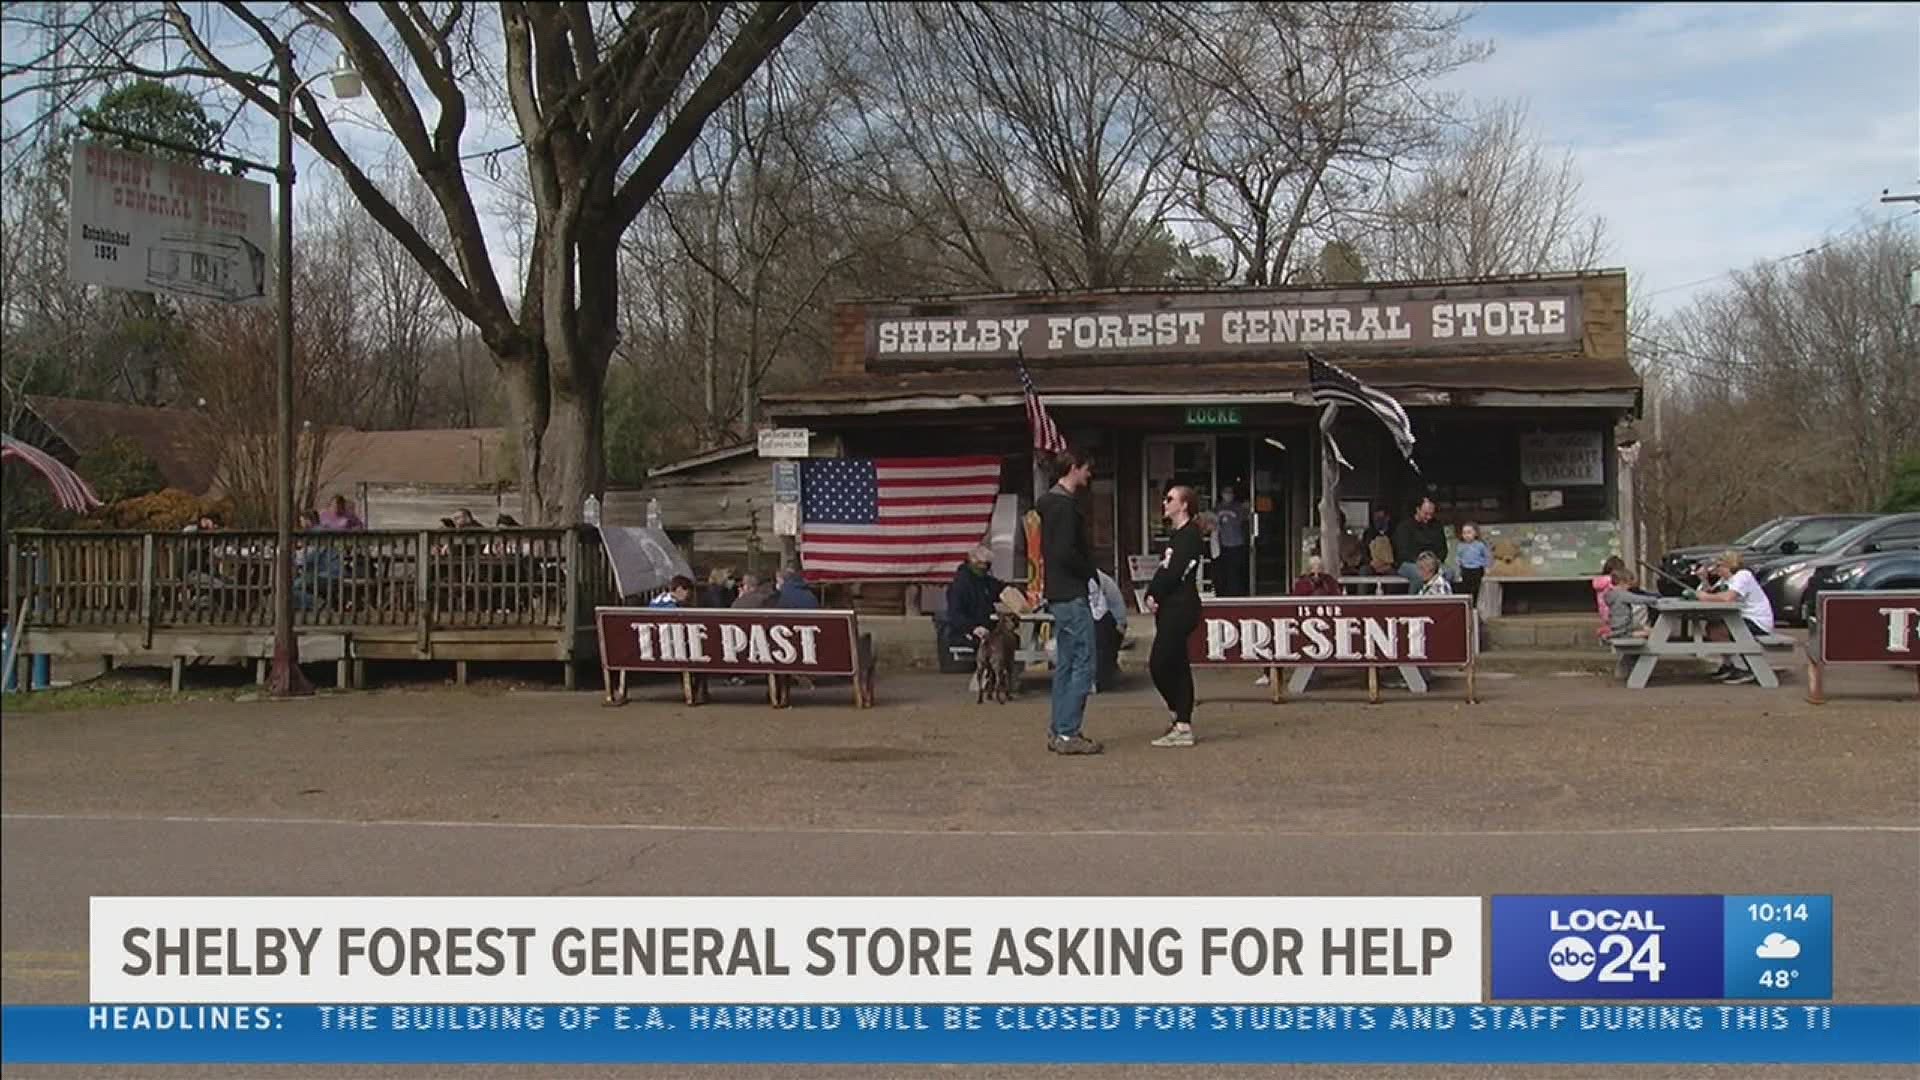 Shelby Forest General Store was built in 1934 and has maintained its authenticity for generations.